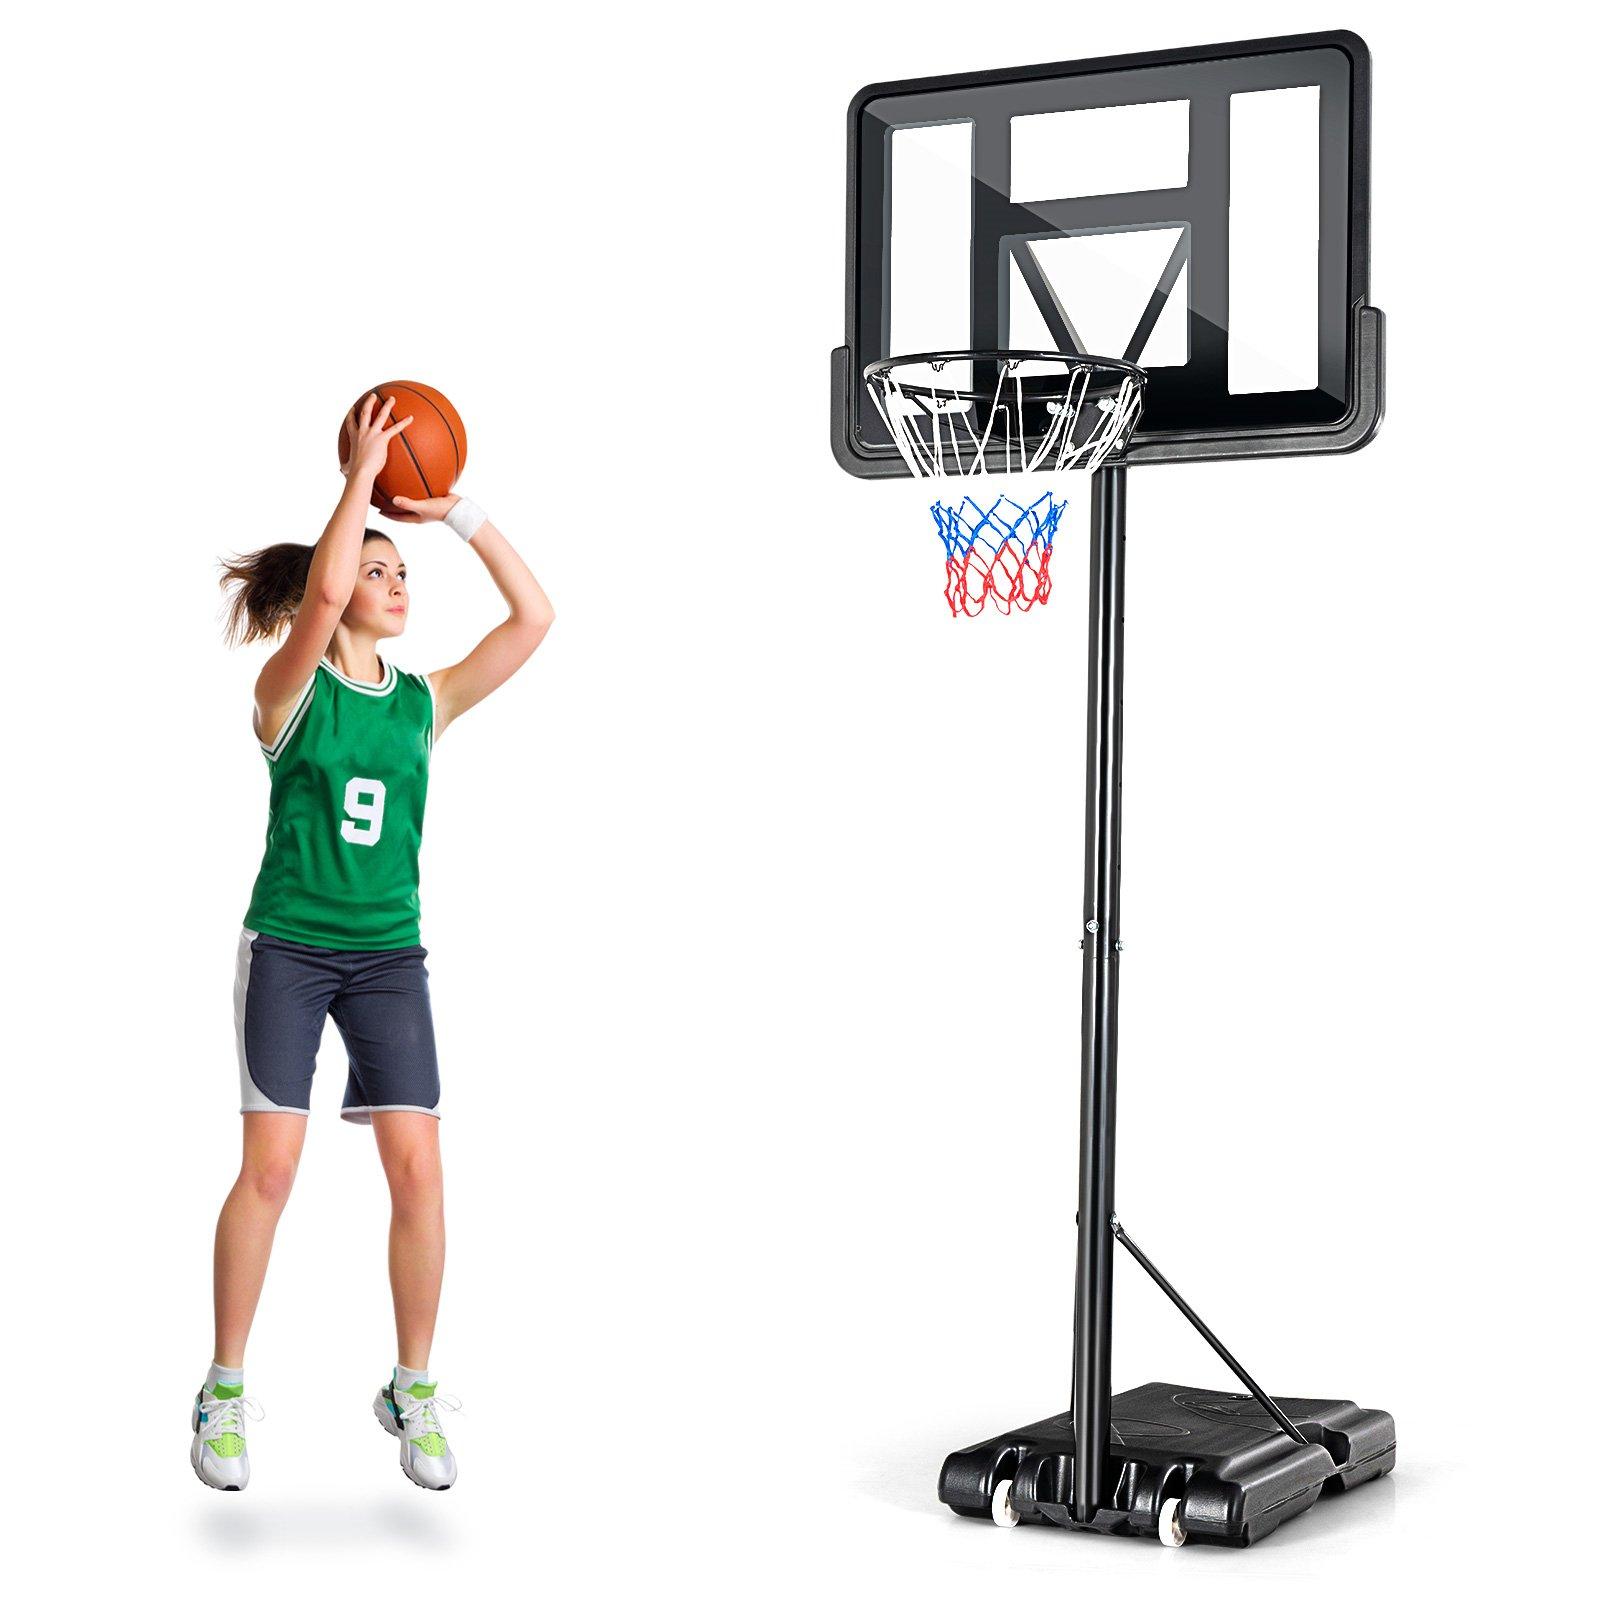 Portable Basketball Hoop Height Adjustable Basketball Stand System with Net & Portable Wheels